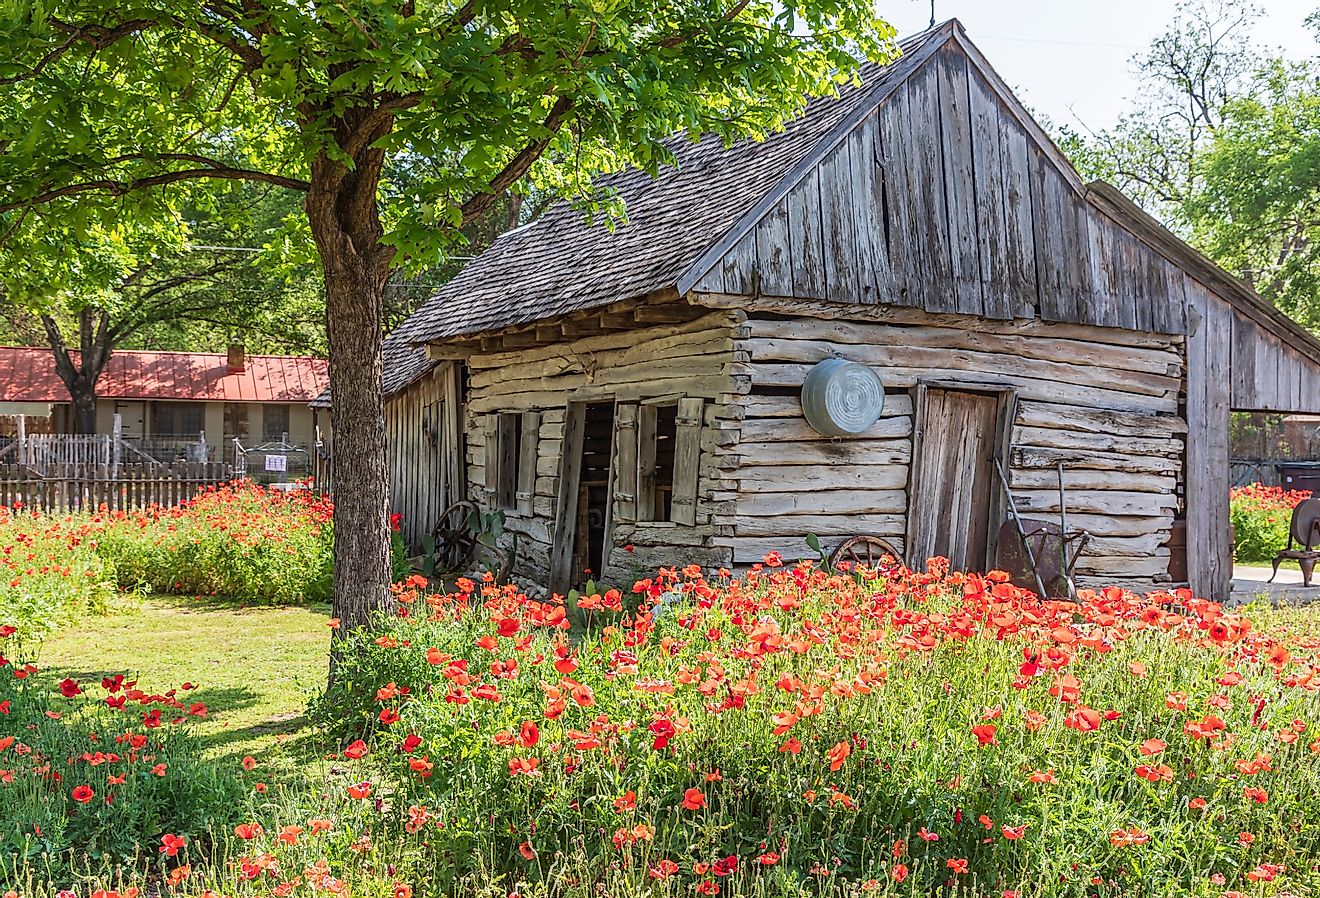 Castroville, Texas, poppies and historic buildings in the Texas Hill Country.